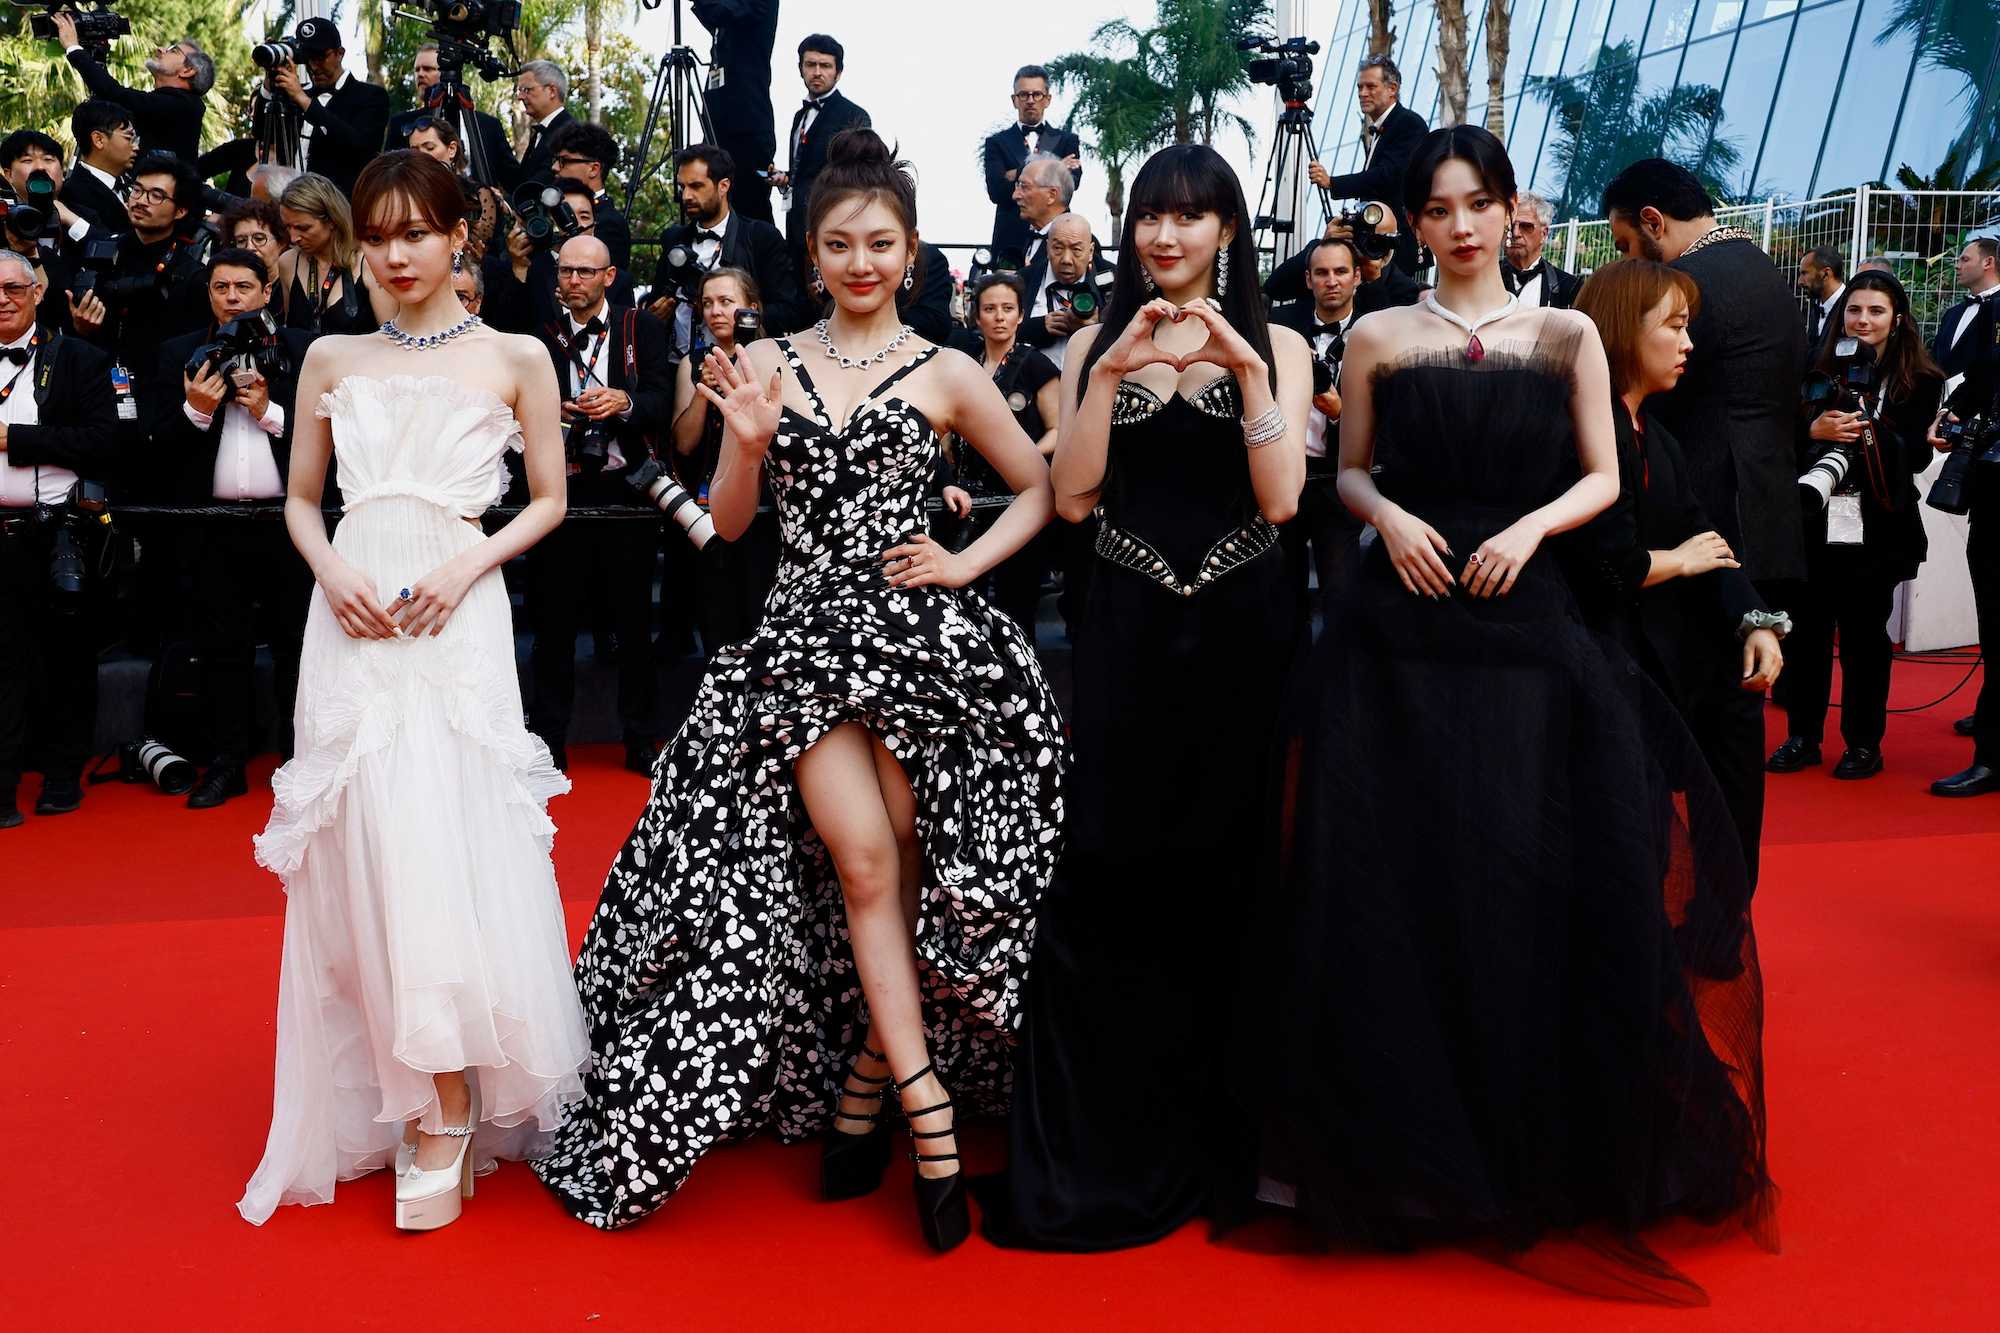 aespa becomes first K-pop group to grace Cannes